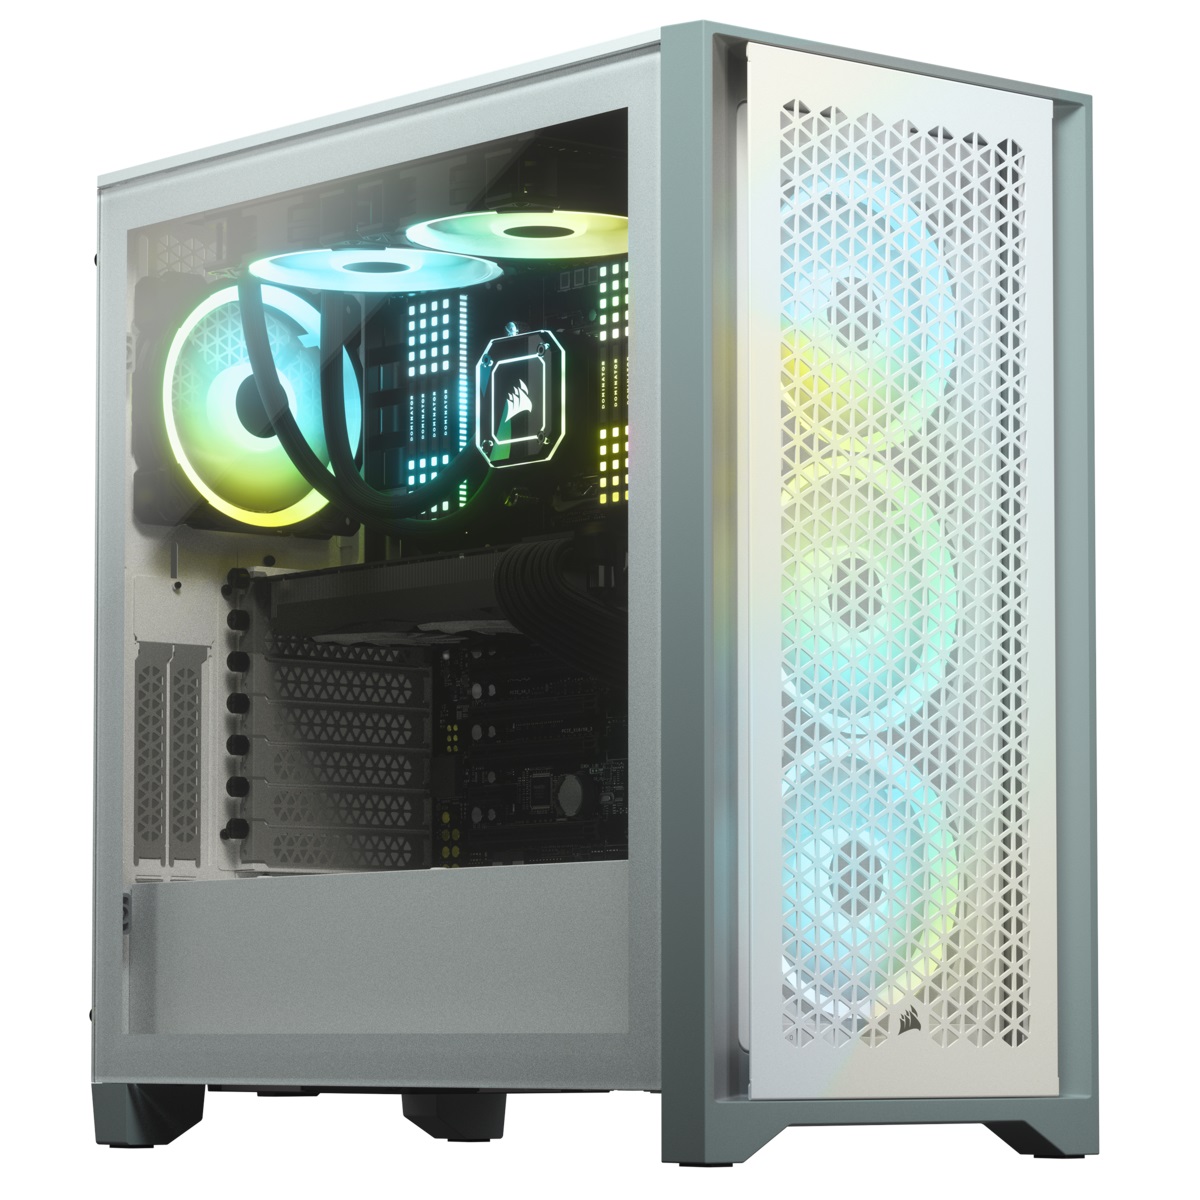  <b>Mid-Tower Case: </b>4000D AIRFLOW- White<br>2x 120mm AirGuide fan, USB 3.0, USB-C, Audio/Microphone port, Tempered Glass Panel  